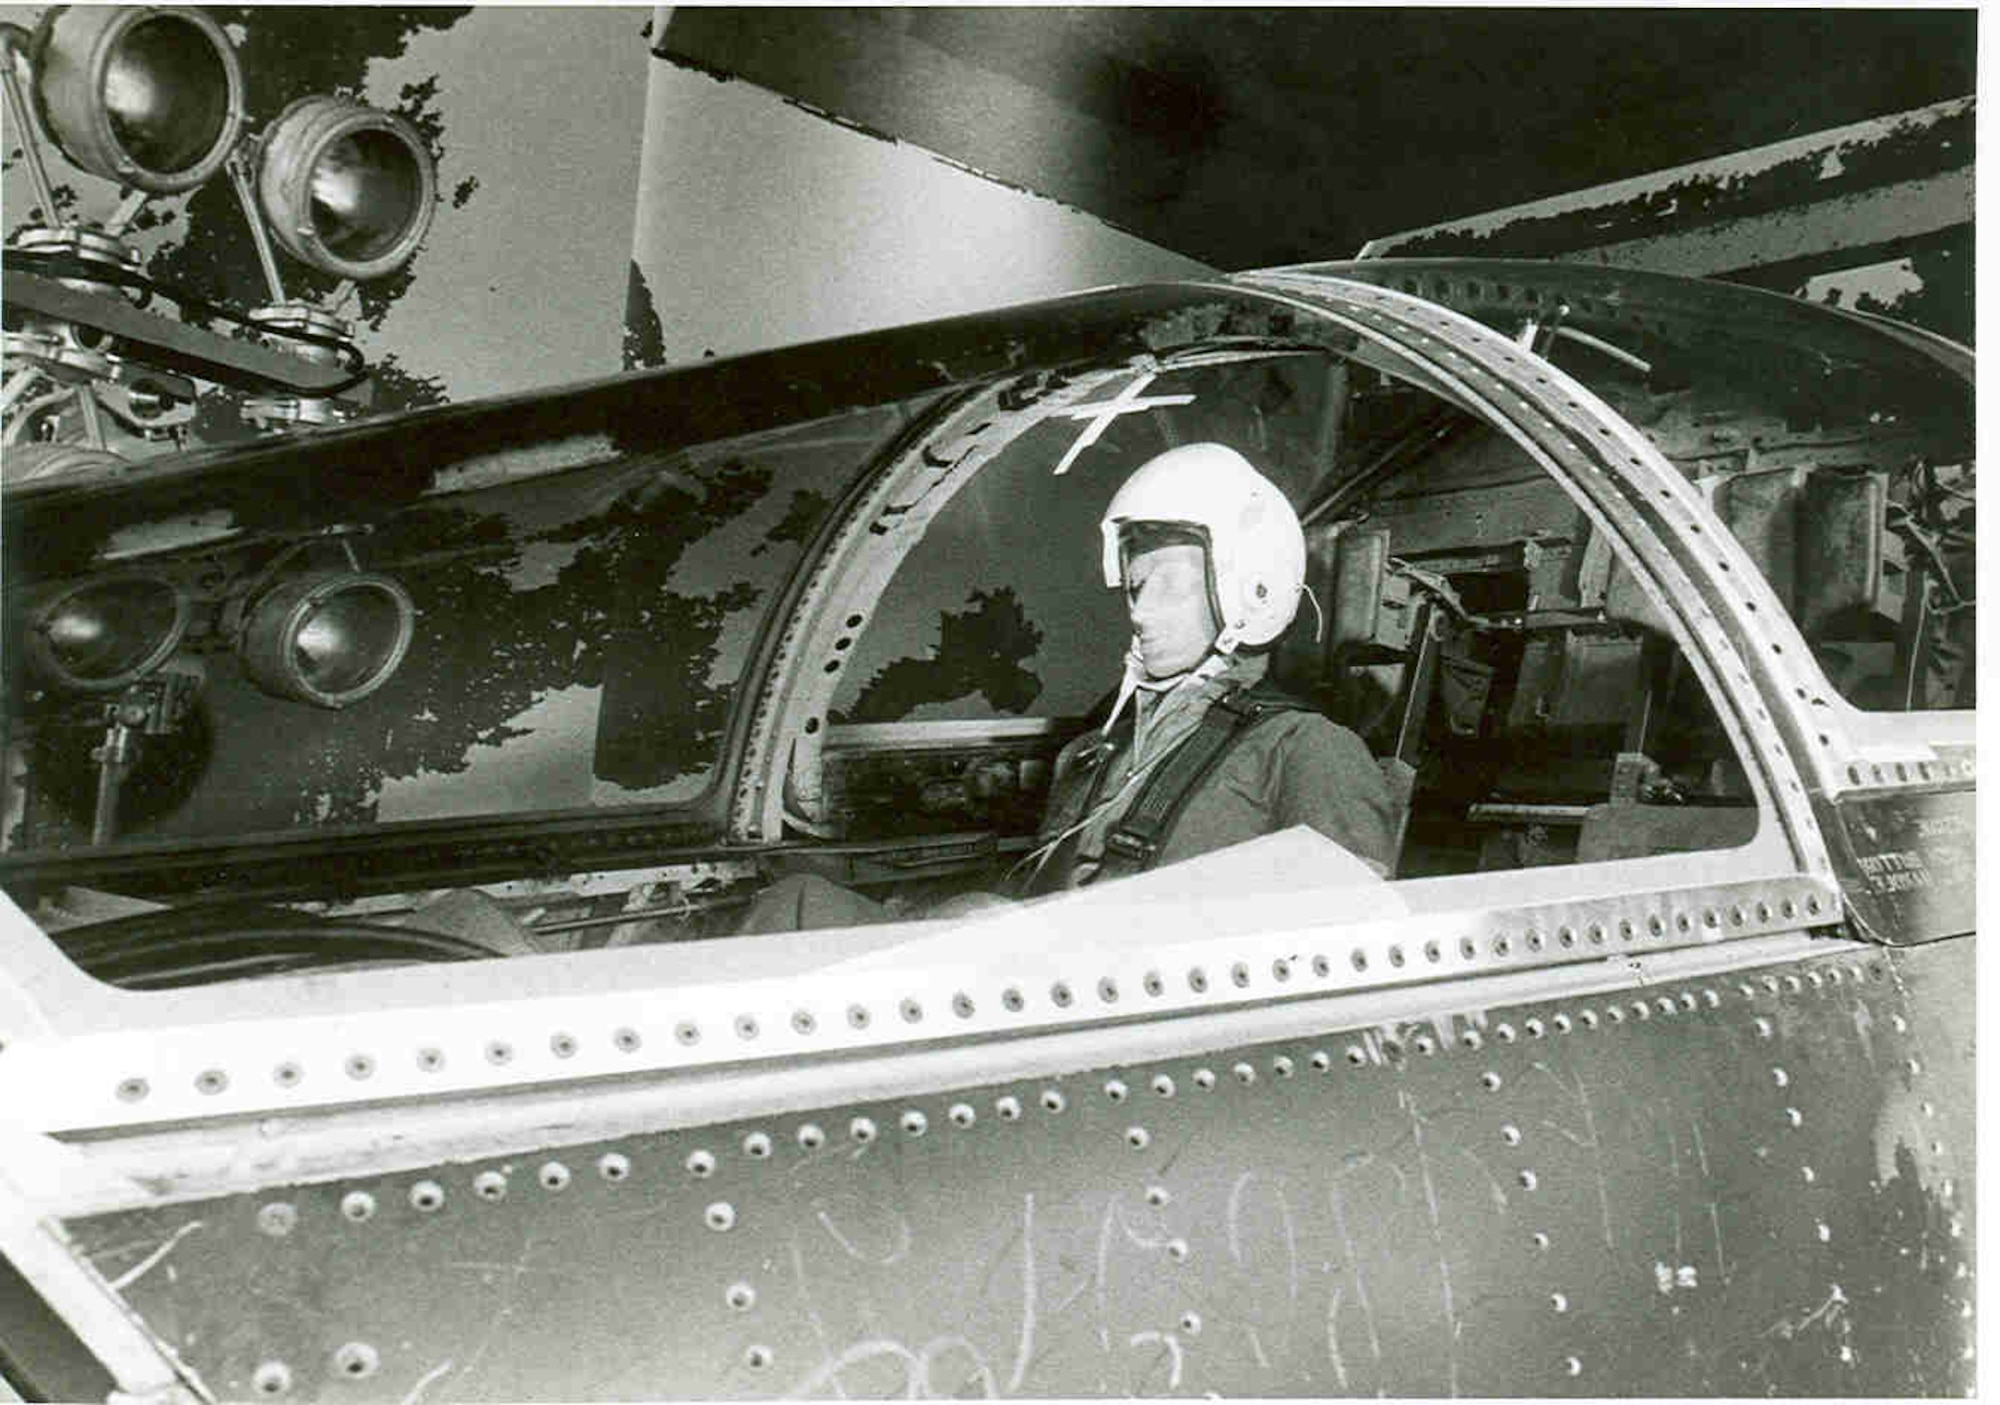 An instrumented manikin is used to evaluate potential hazards to the aircrew of an aircraft subjected to a bird strike at the Bird Impact Range at Arnold Air Force Base, Tennessee, in the mid-1970s. The “X” above the head of the manikin marks the point of impact. The test facility, commonly referred to as the “Chicken Gun,” was used to simulate in-flight bird strikes to aircraft canopies and other materials by launching chicken carcasses at test articles. The first shot from the Chicken Gun was fired 50 years ago. (U.S. Air Force photo)